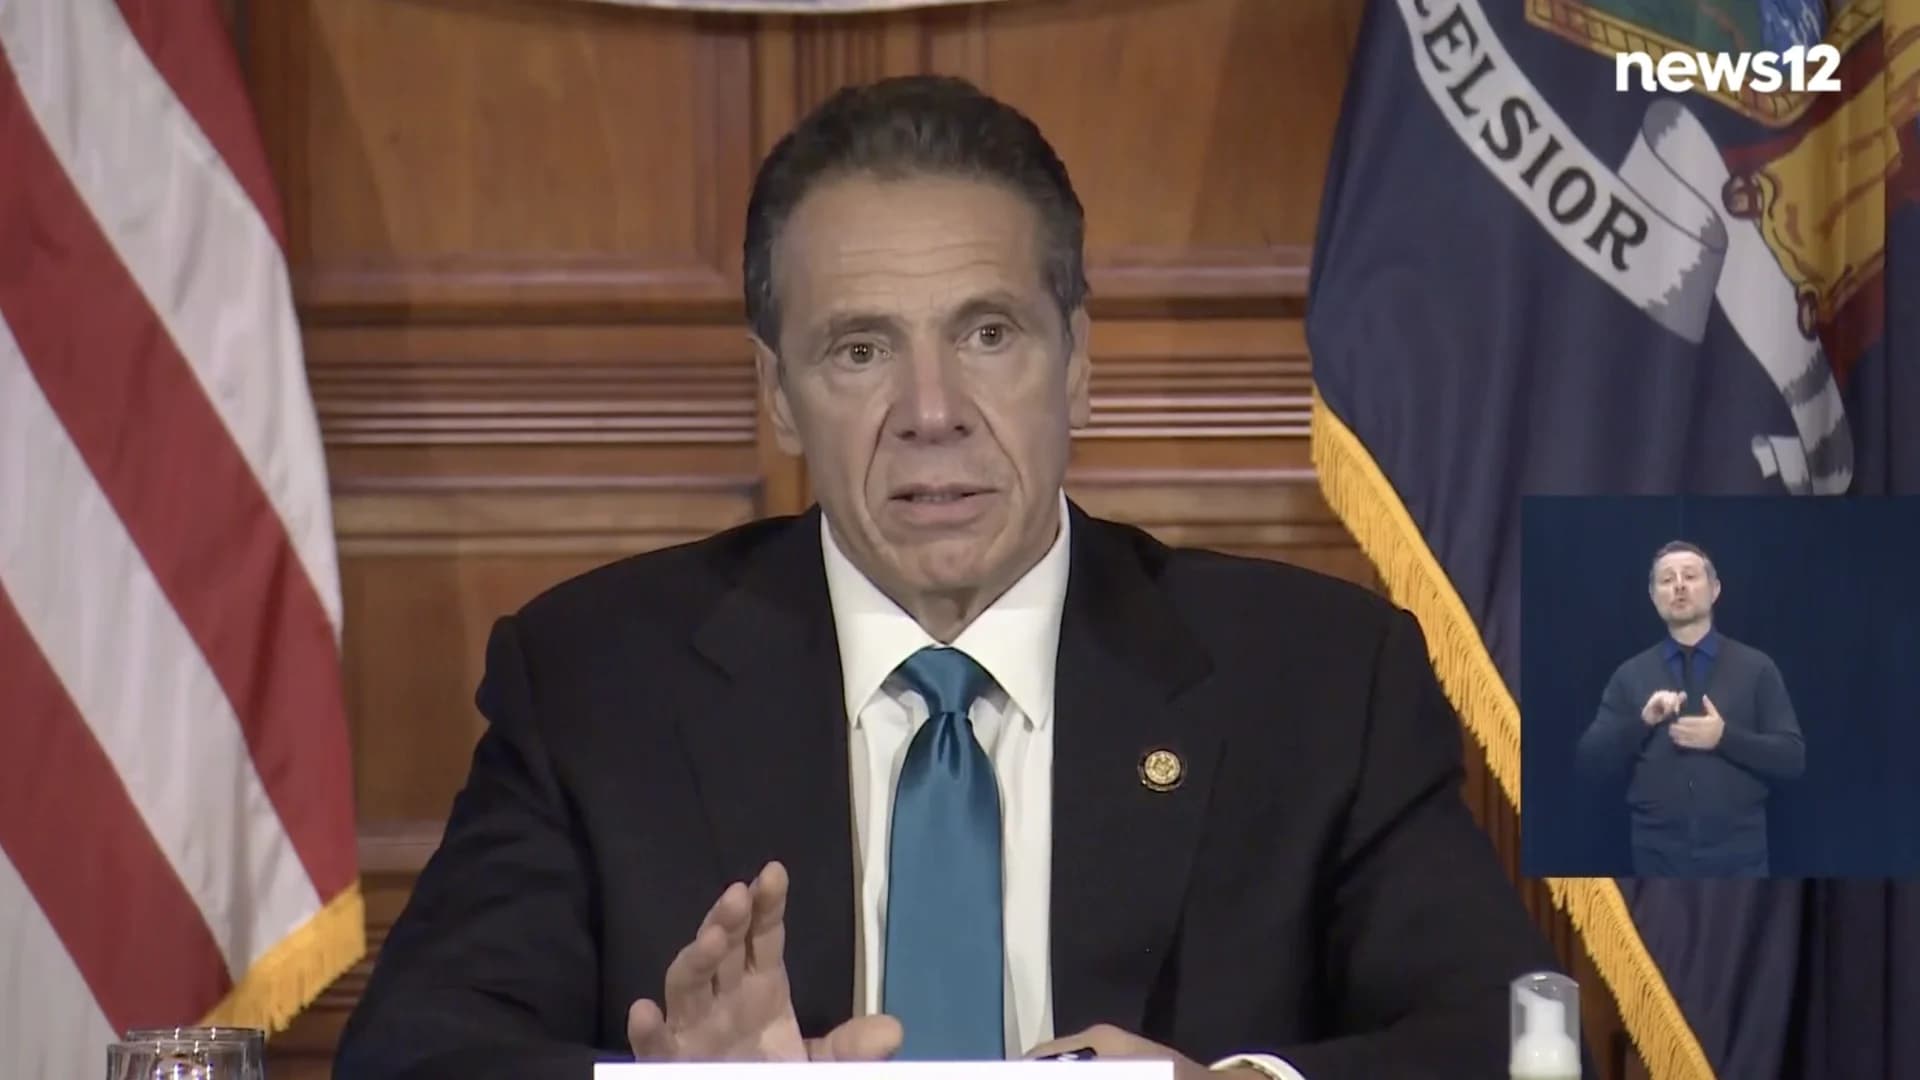 'You have to control it': Cuomo criticizes Trump administration for chief of staff's comments on controlling COVID-19